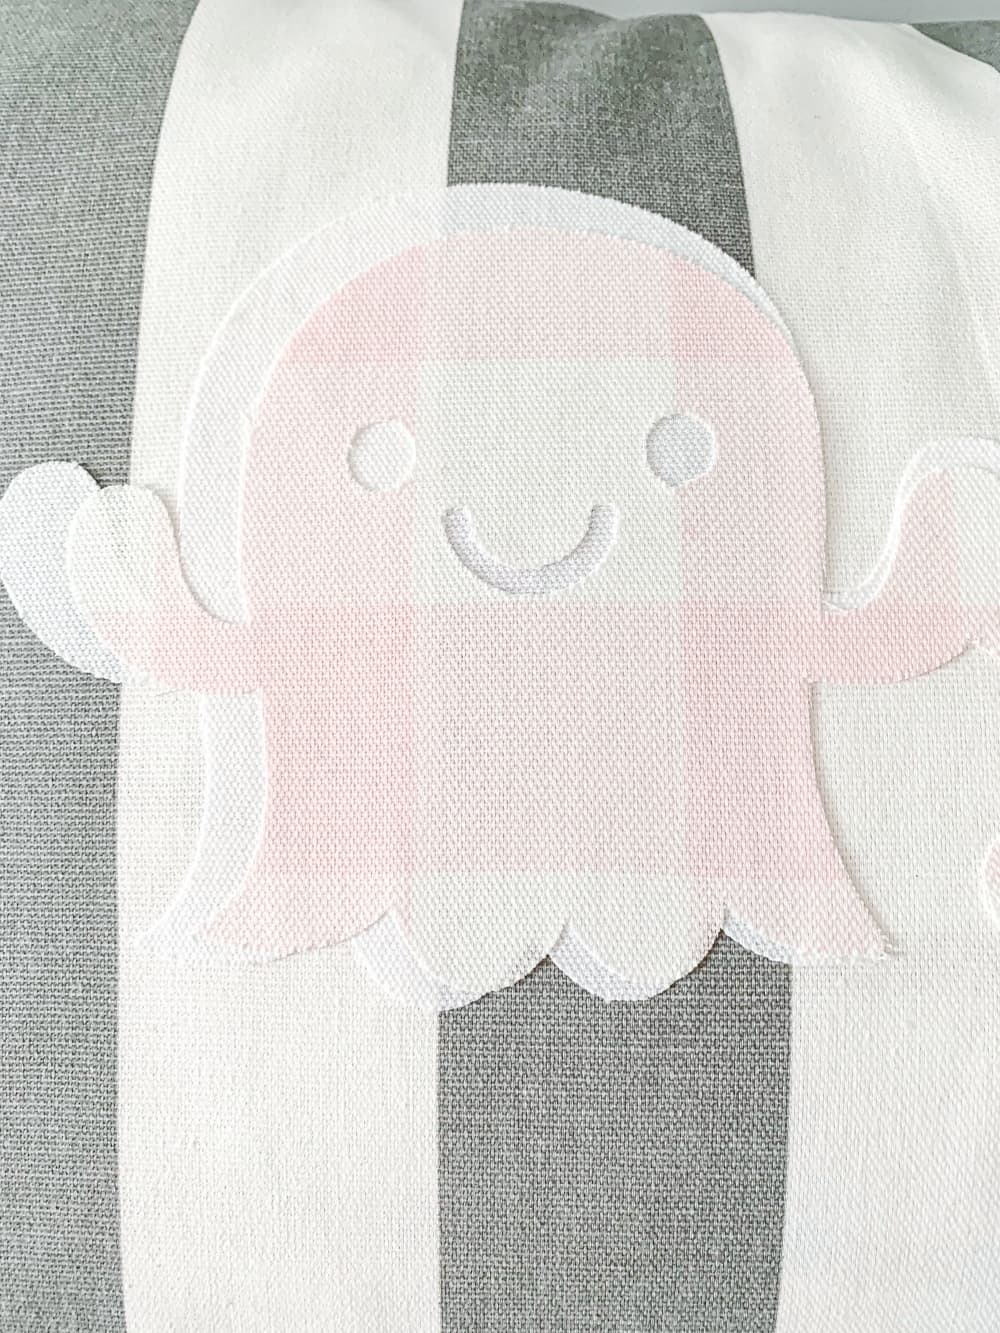 pink and white ghost applique